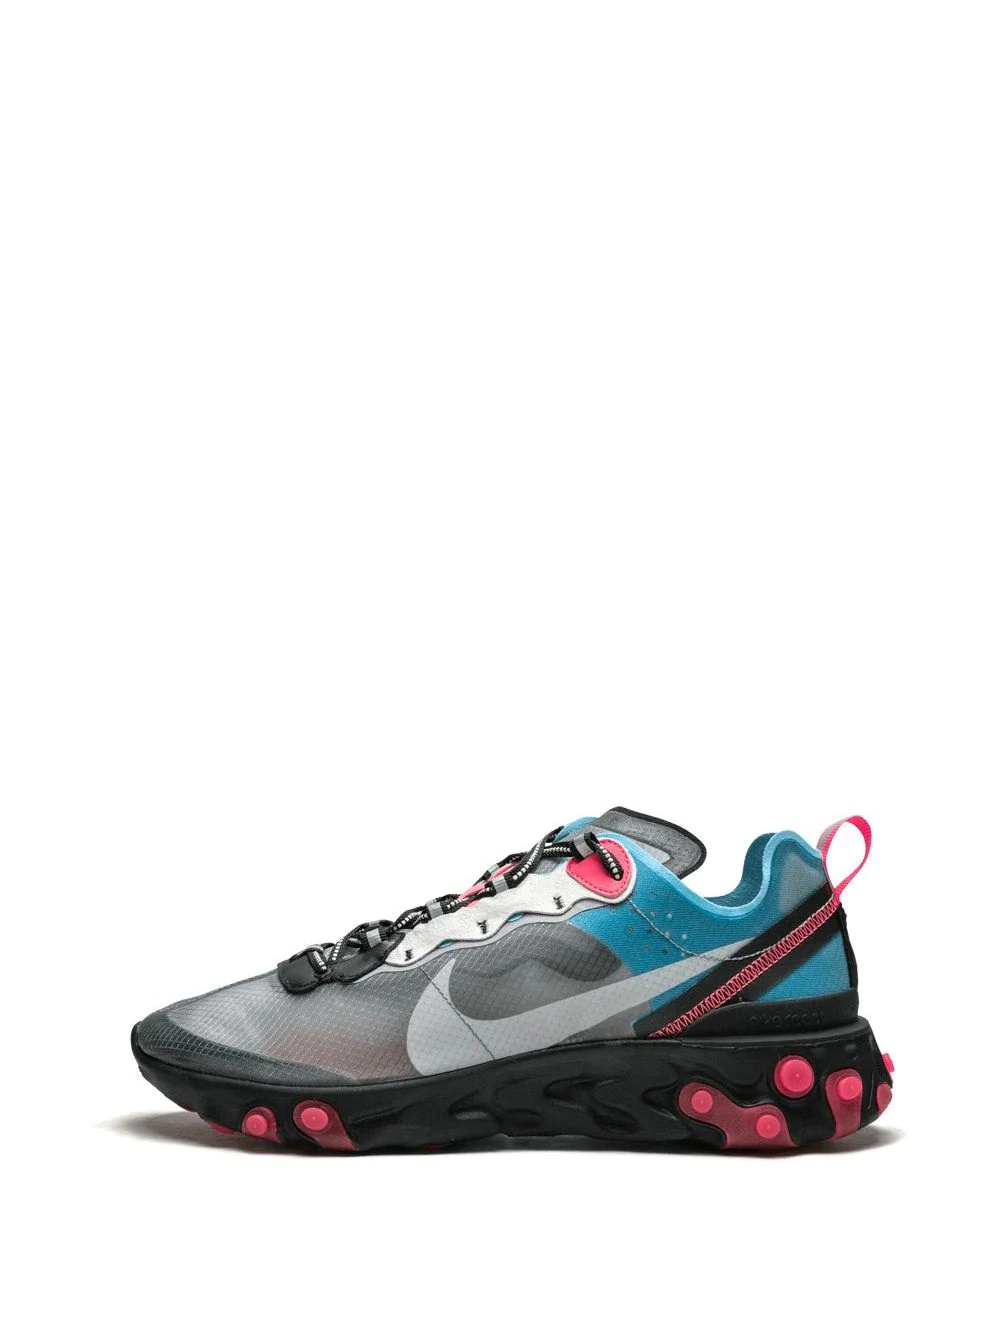 React Element 87 "Blue Chill" sneakers - 6